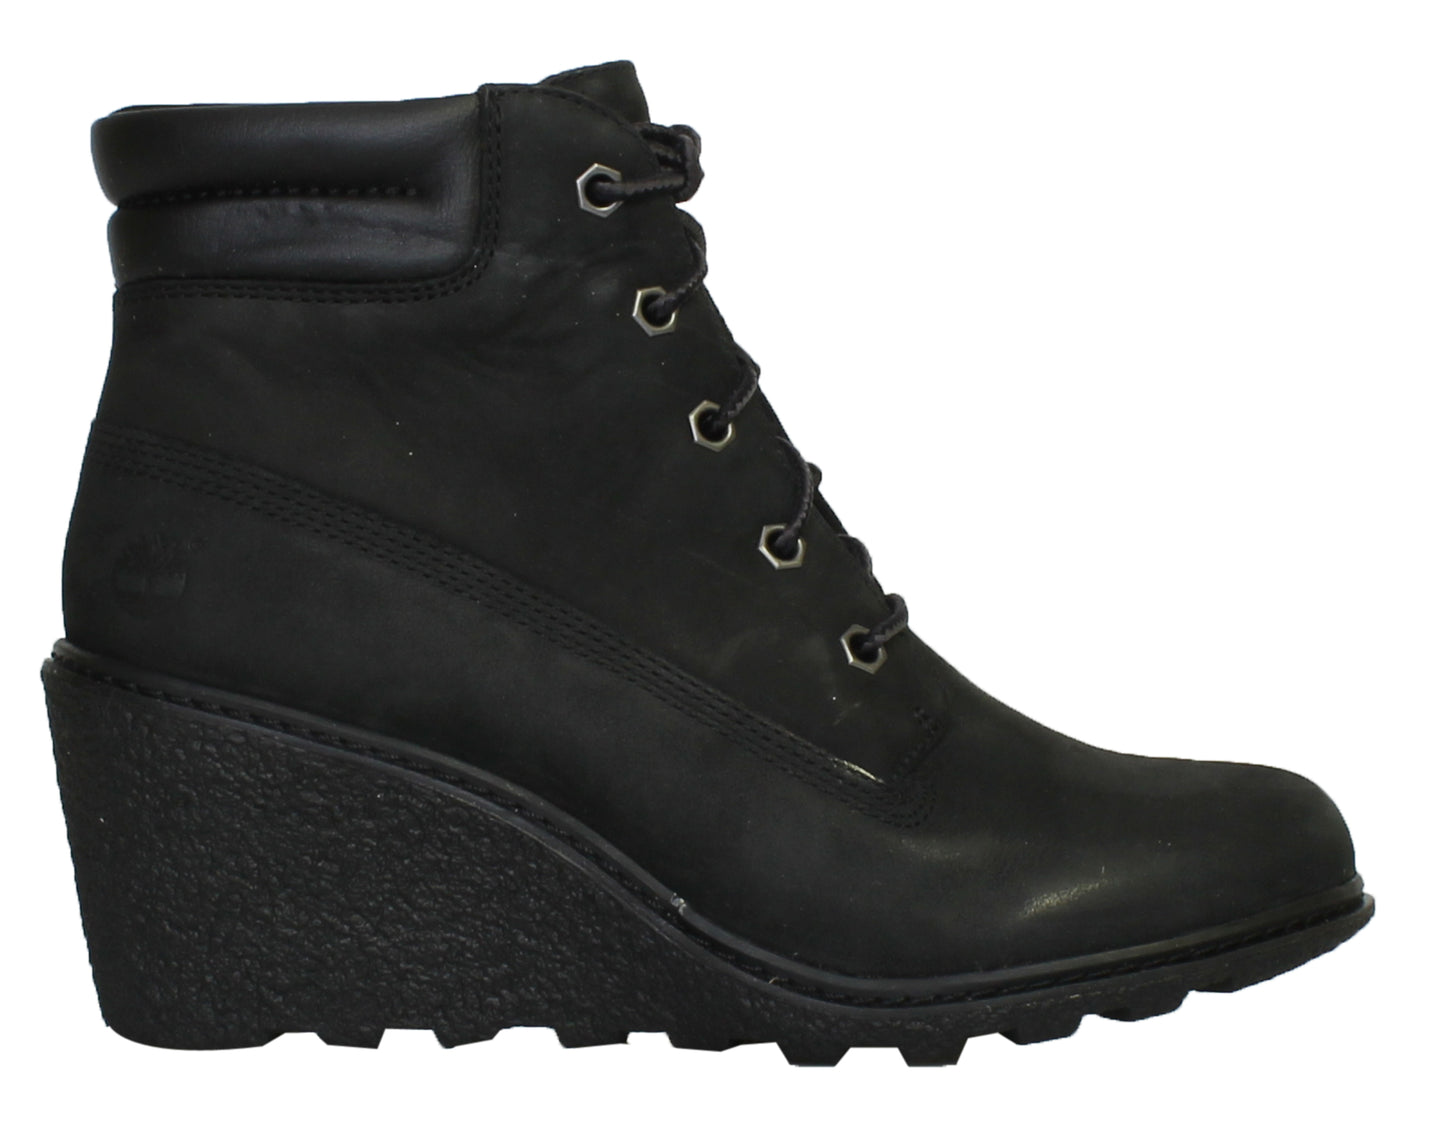 Timberland Earthkeepers Amston 6-Inch Women's Wedge Boots